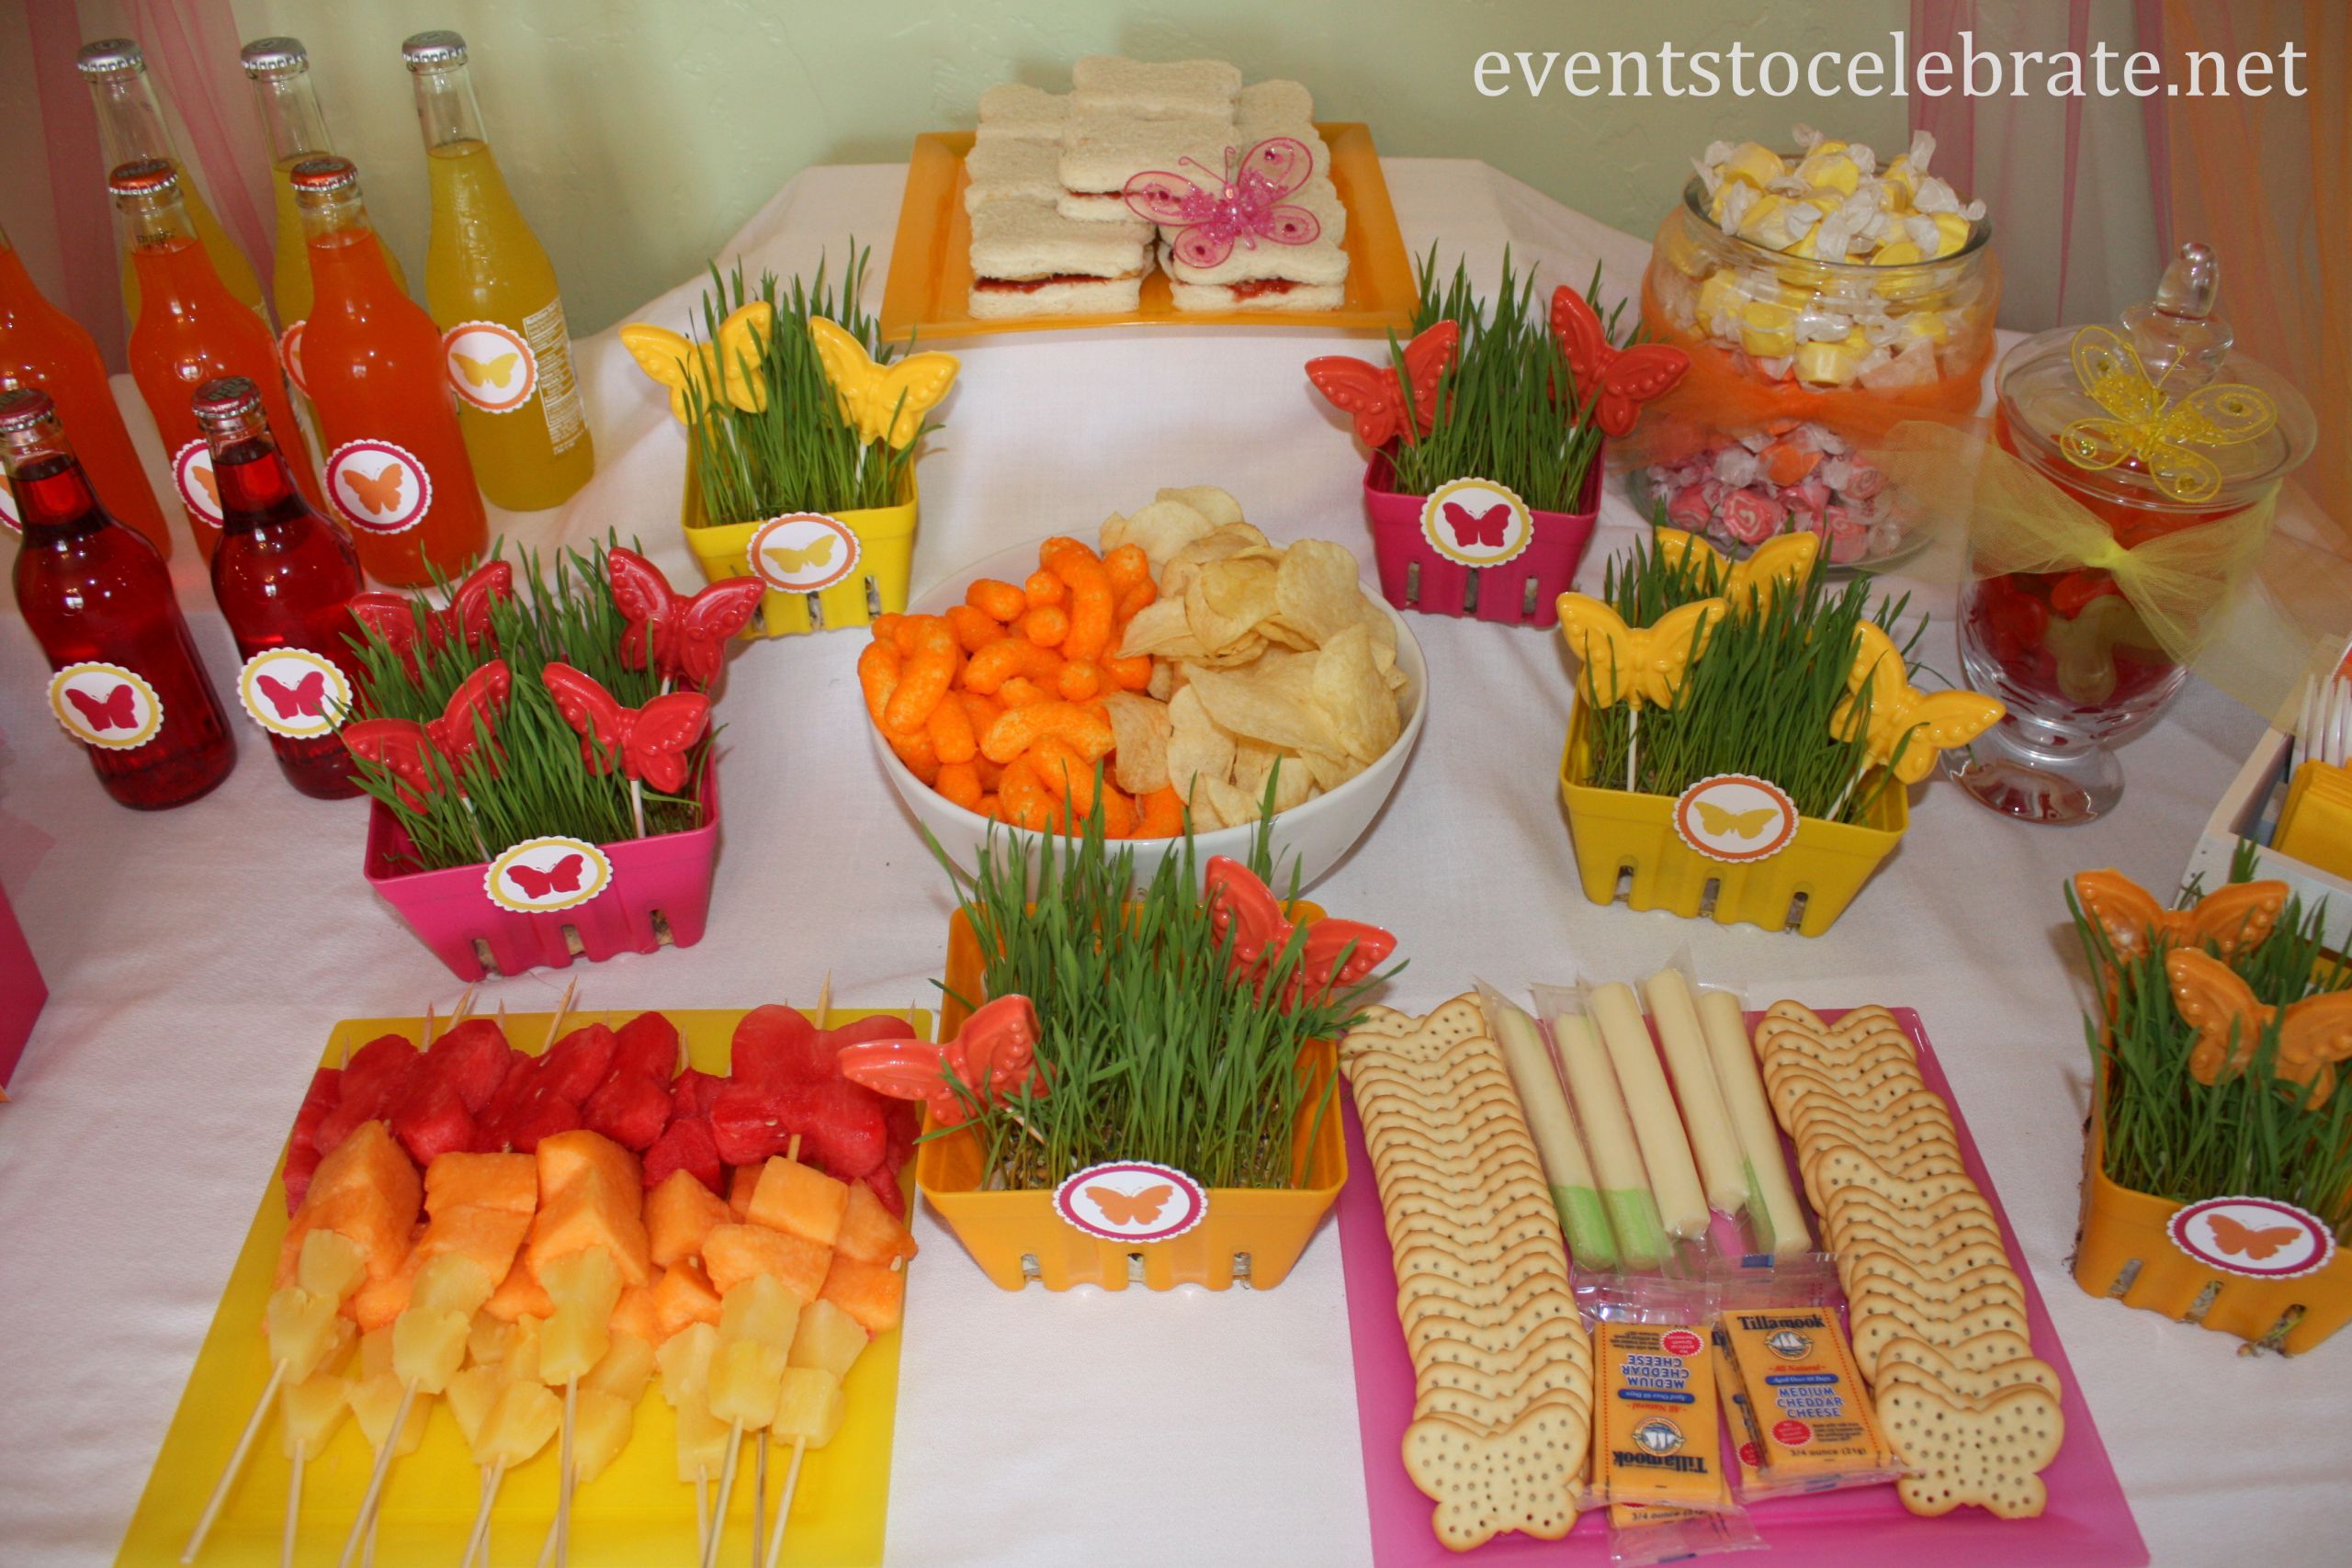 Toddler Bday Party Food Ideas
 Butterfly Themed Birthday Party Food & Desserts events